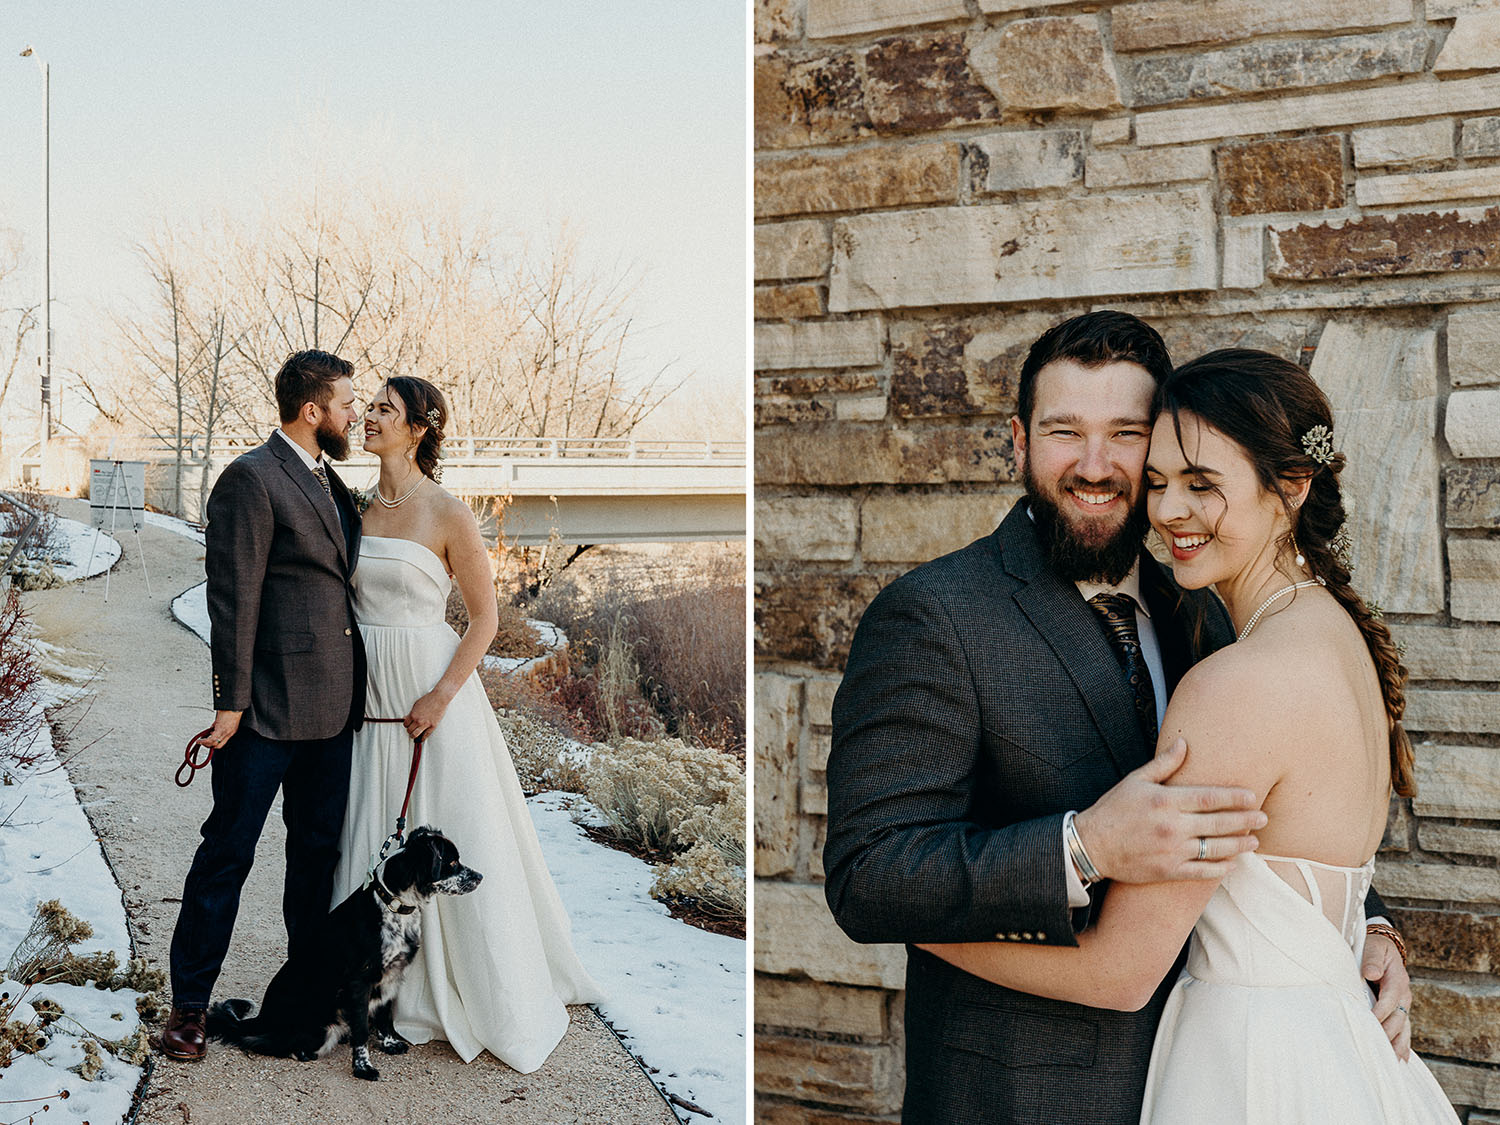 Fort Collins Wedding | Erica & Leif - Erin Wheat Co.